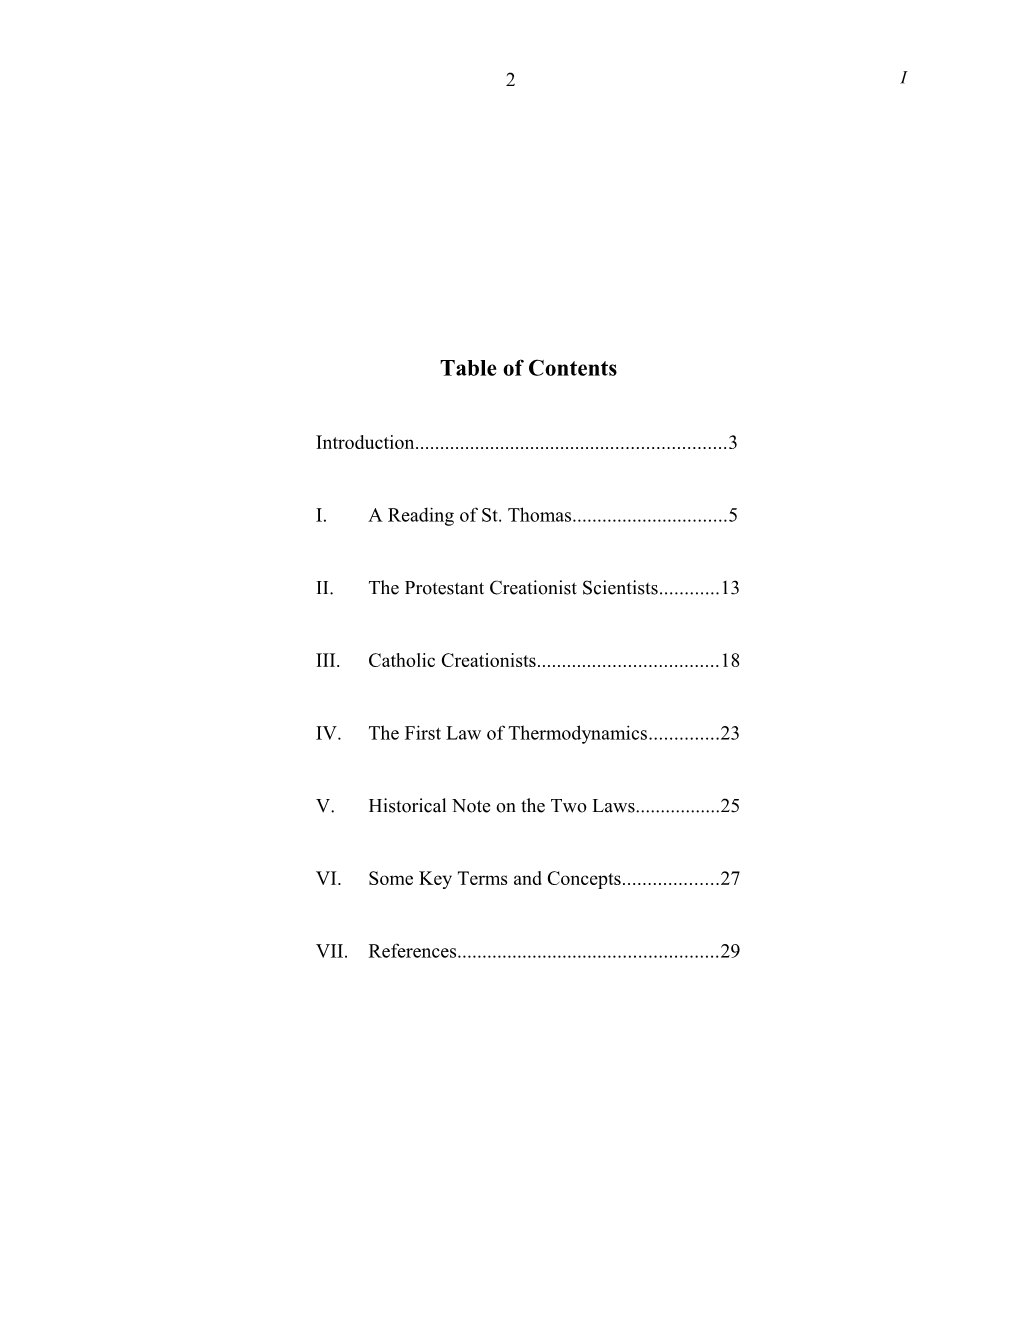 Table of Contents s489